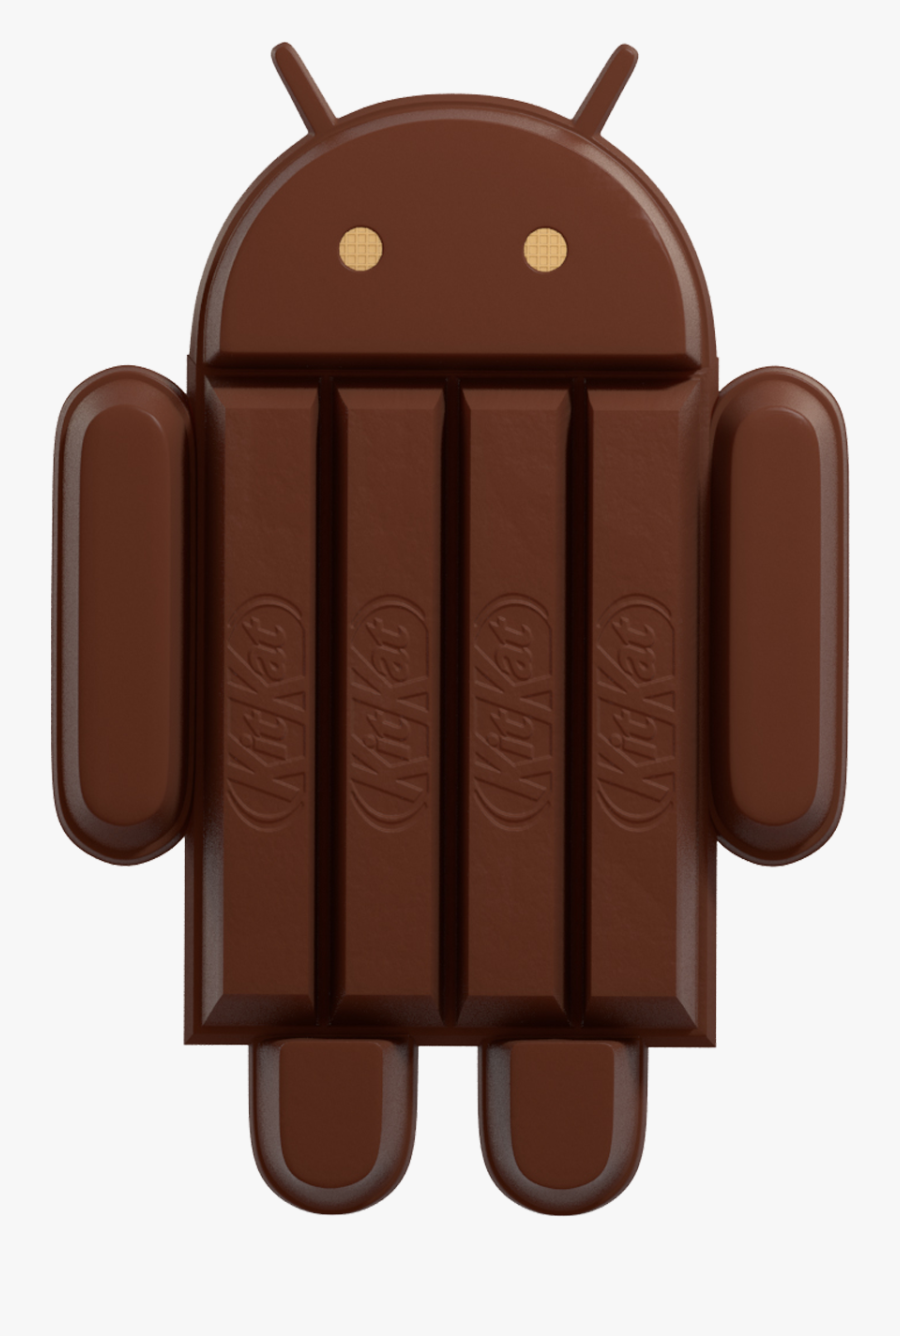 Android Kitkat Live Clipart And More - Android Kitkat Png, Transparent Clipart